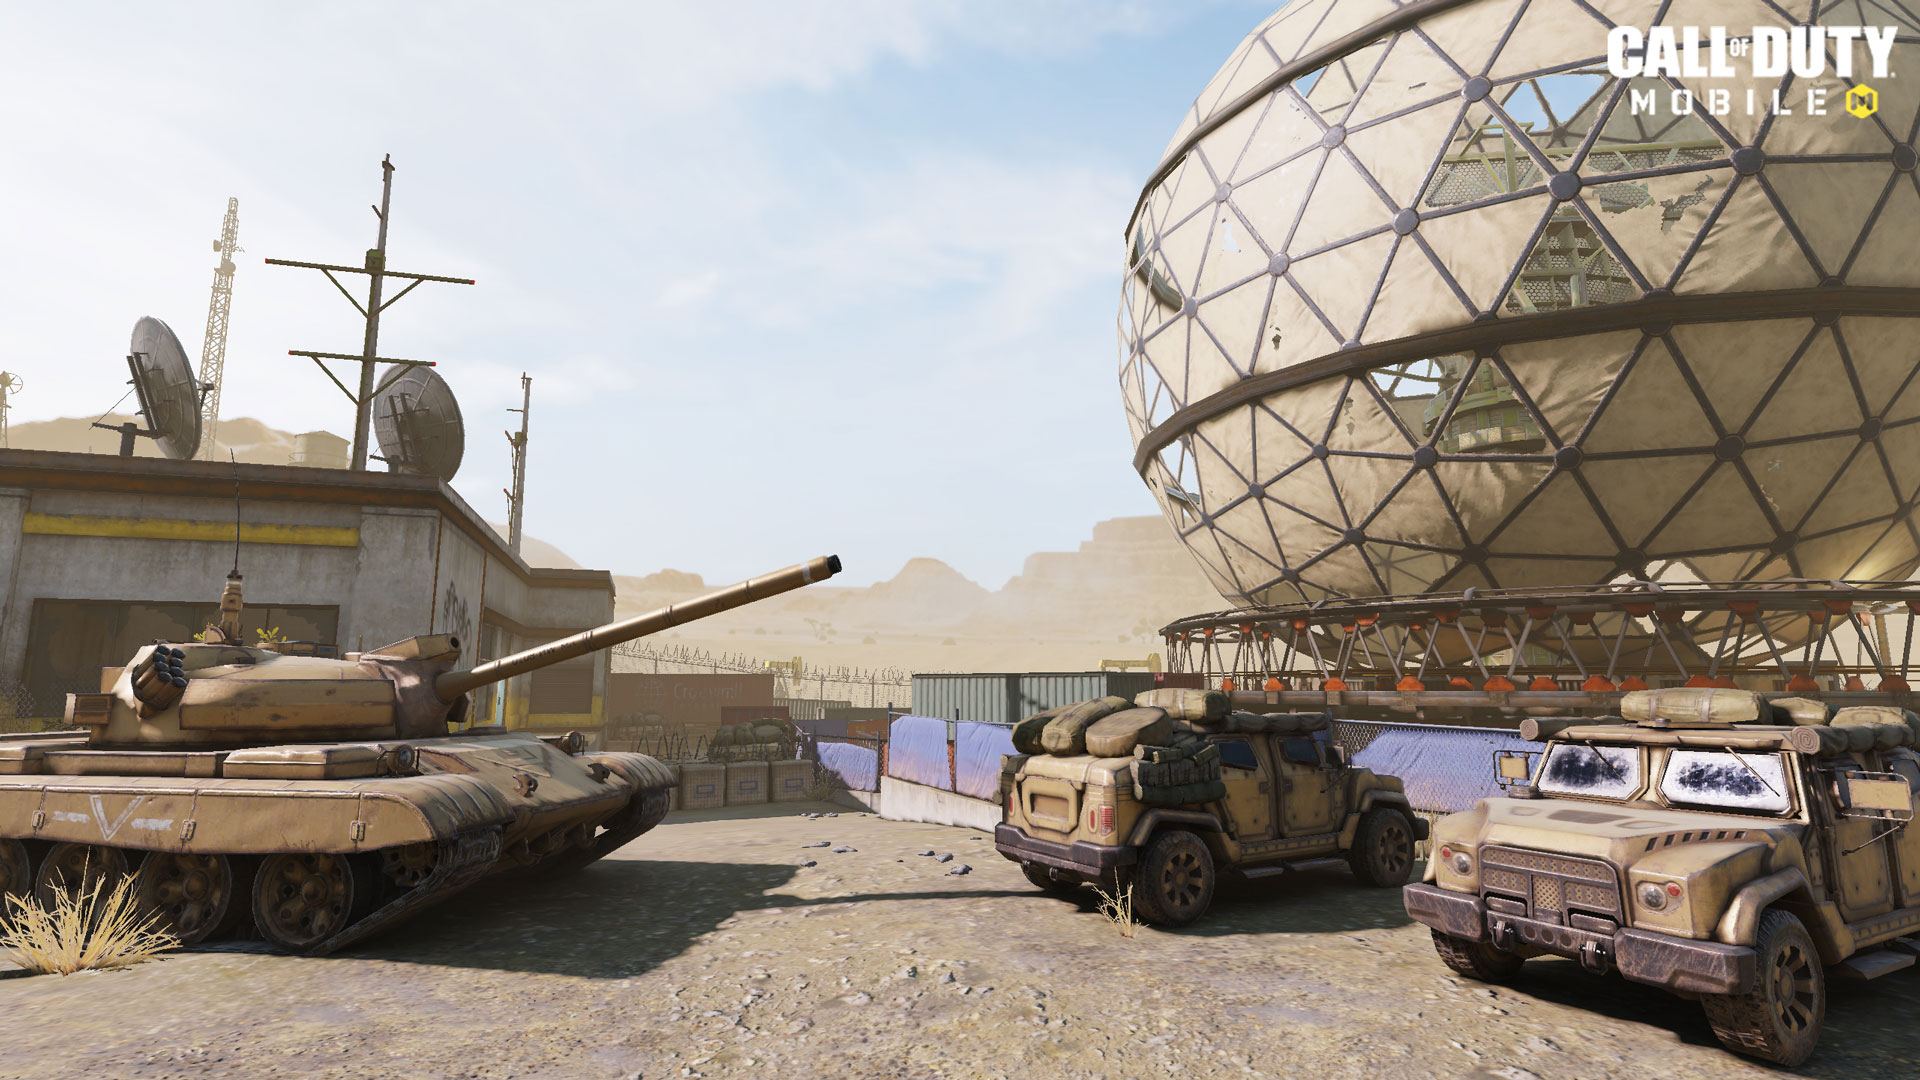 Call of Duty: Mobile Season 4 features a Wild West theme and is called Spurned and Burned